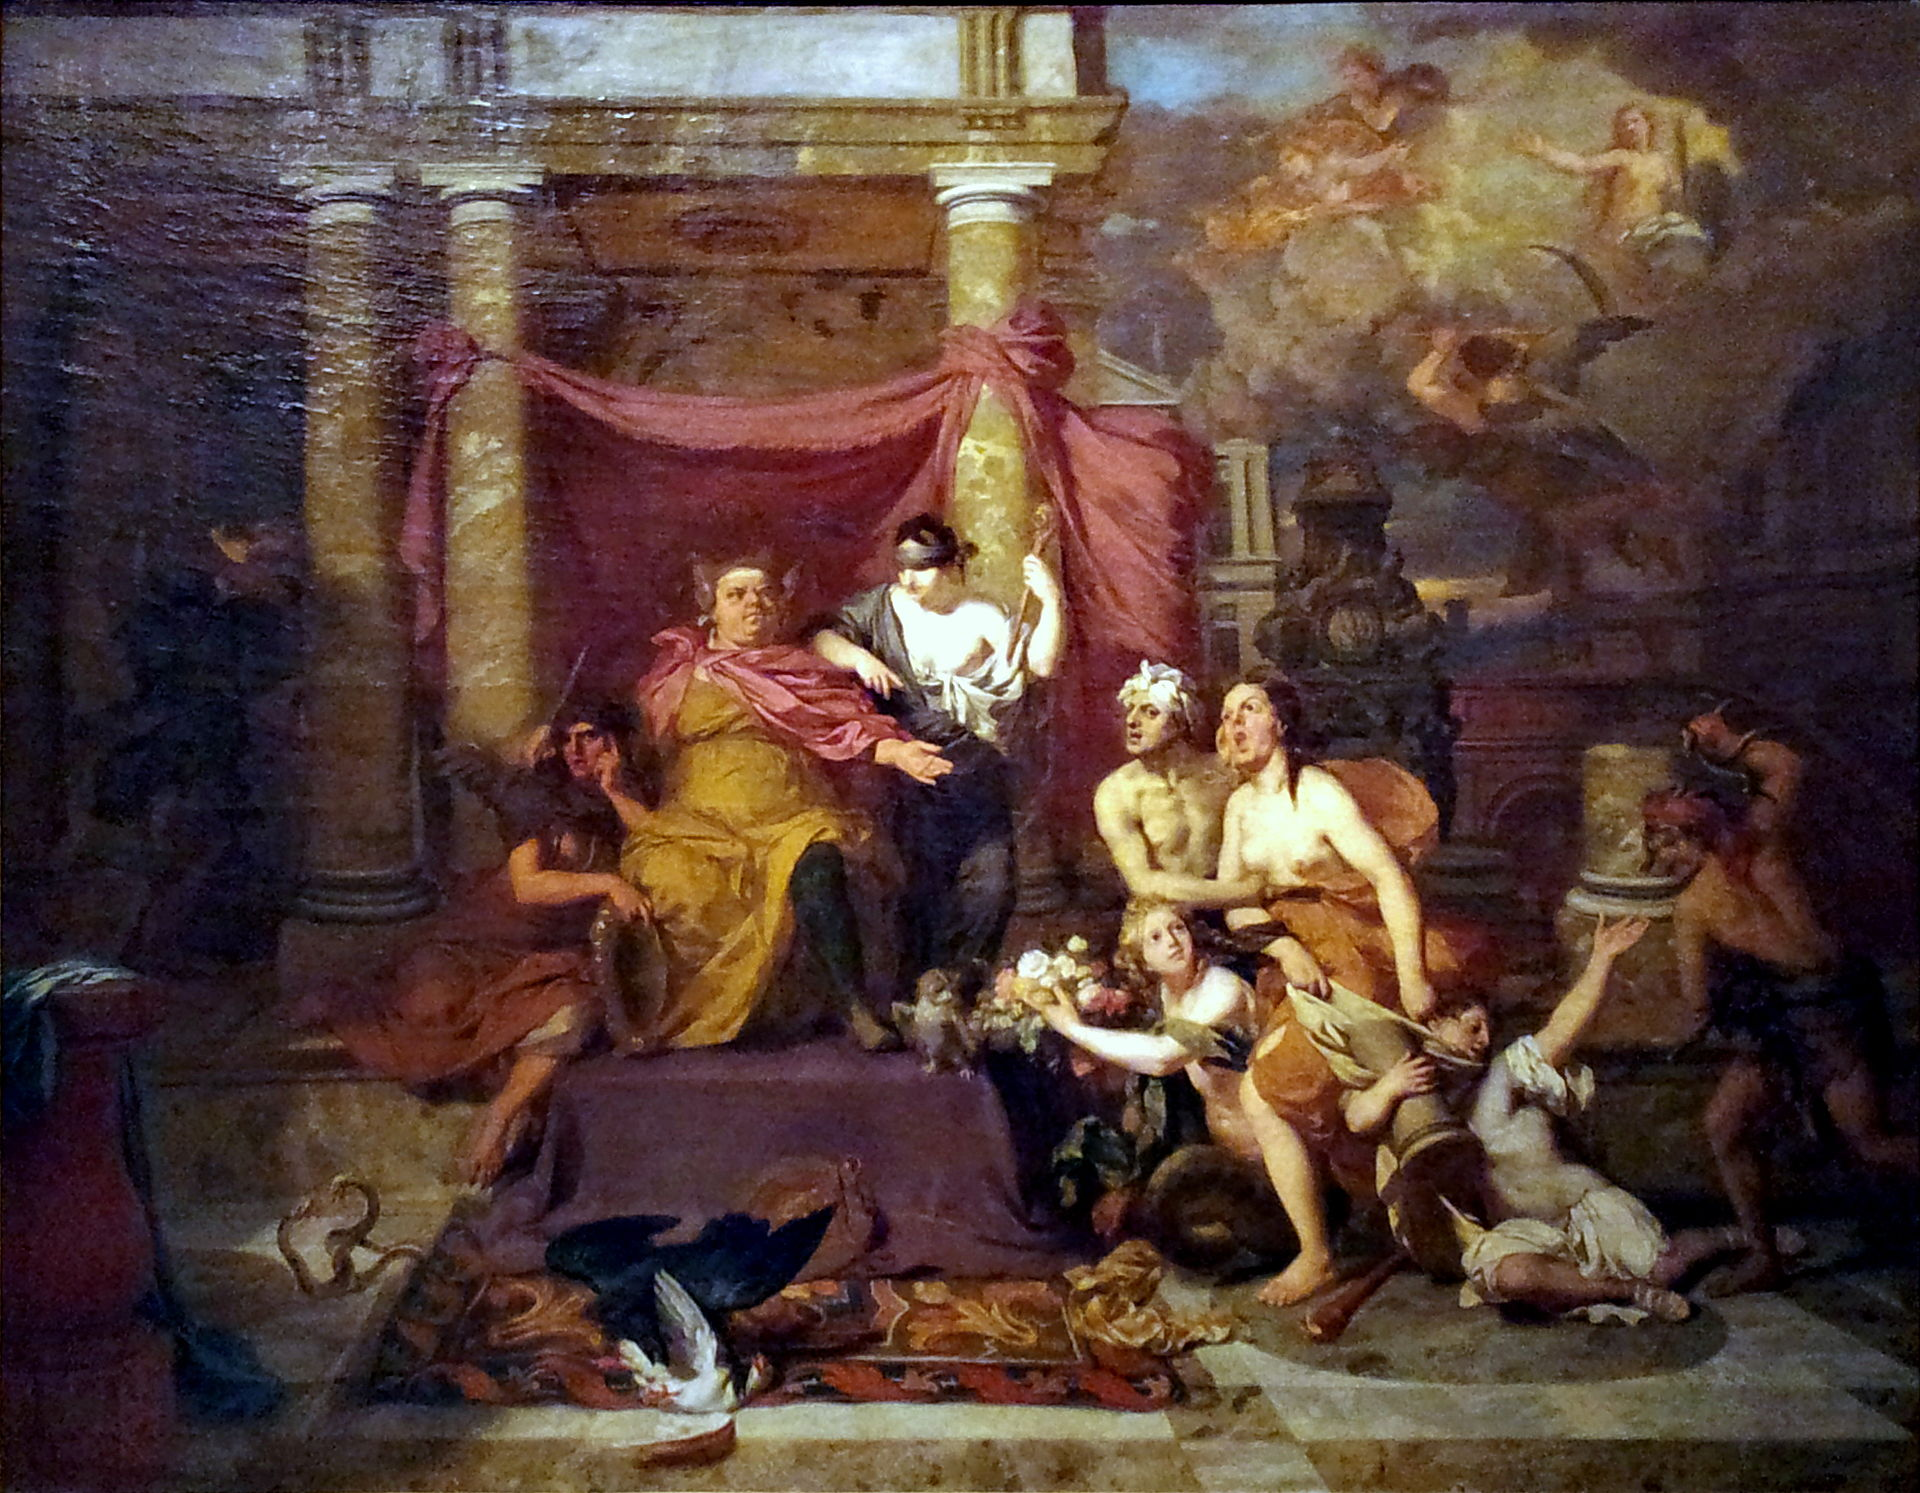 The Court of Foolishness of Gerard de Lairesse. The accused, pursued by Hatred, is led by Calumny, Envy and Perfidy before a judge with donkey ears, surrounded by Ignorance and Suspicion. From WikiMedia Commons.